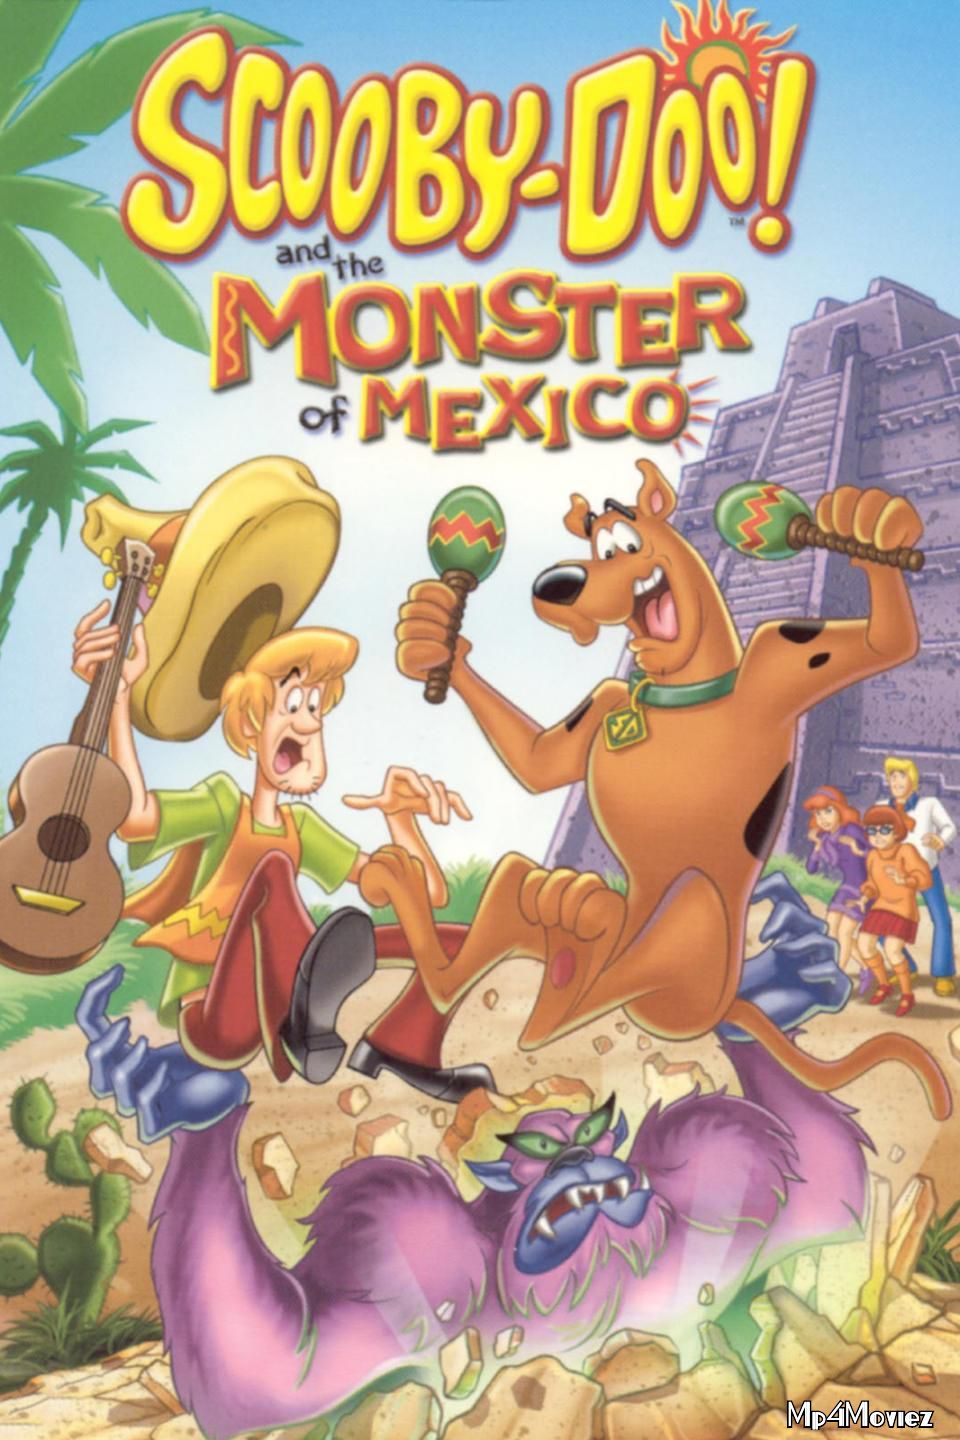 Scooby-Doo and the Monster of Mexico 2003 Hindi Dubbed Movie download full movie